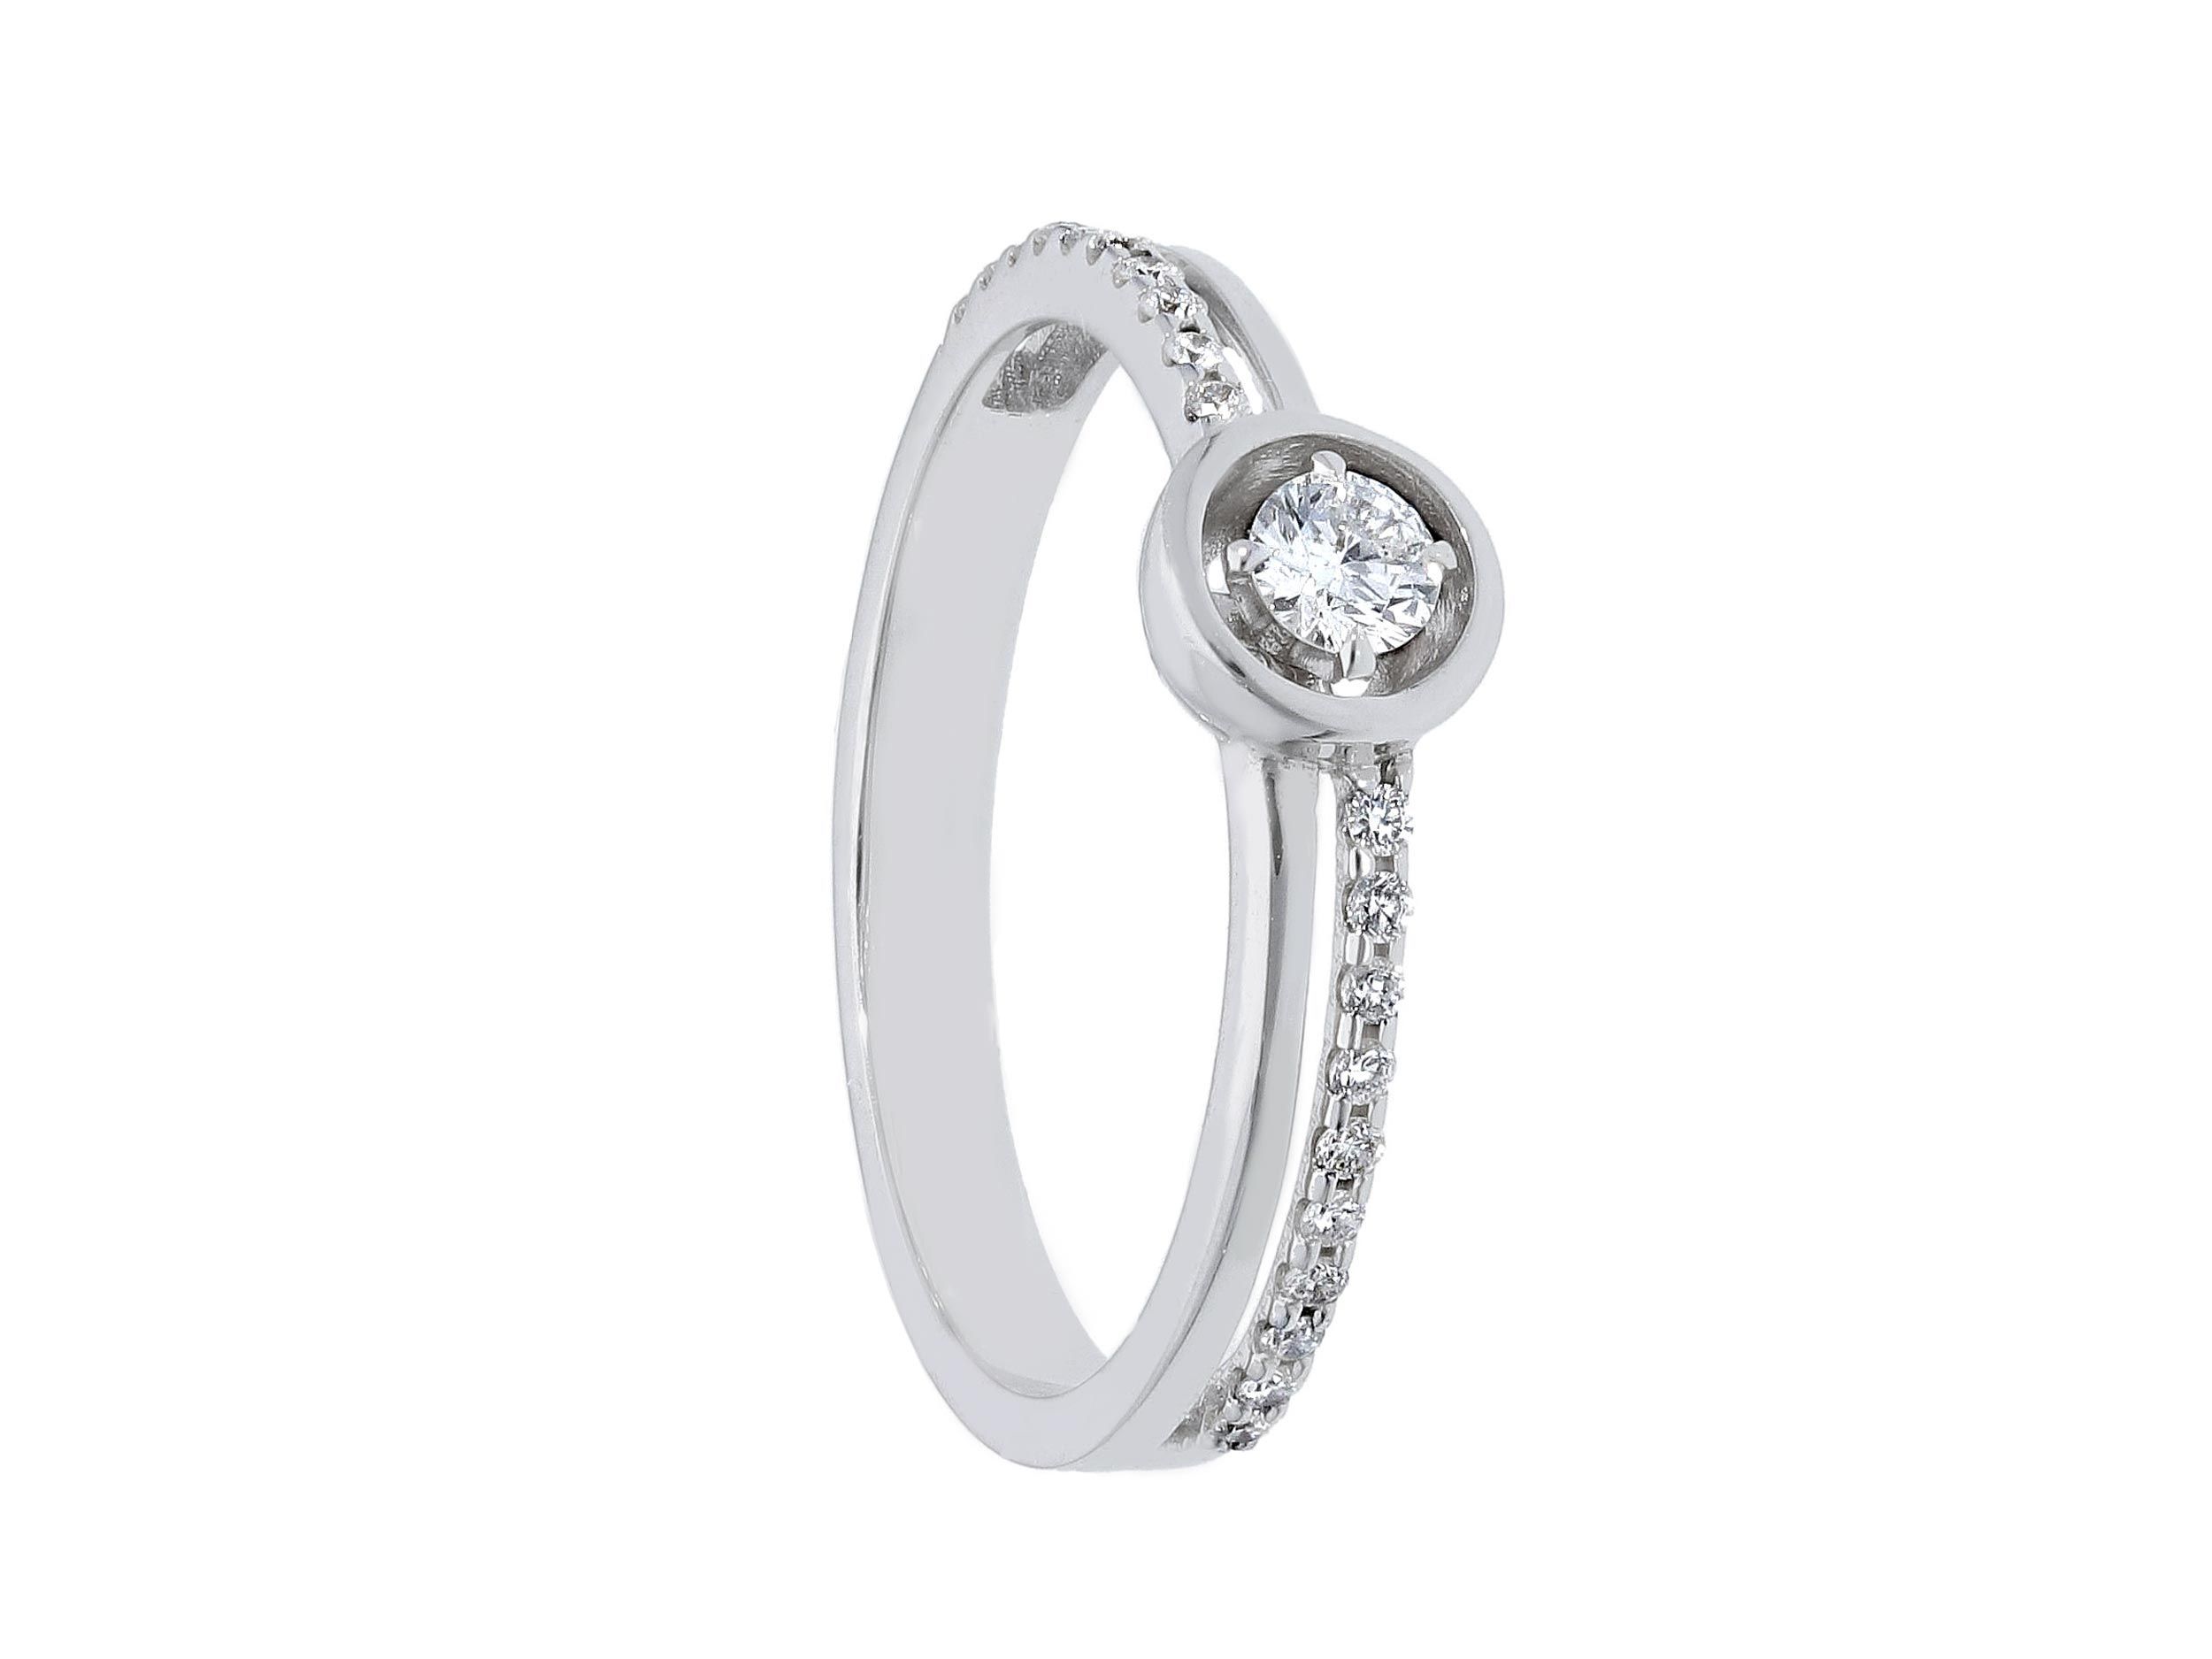 White gold k18 ring with diamonds (code S217574)